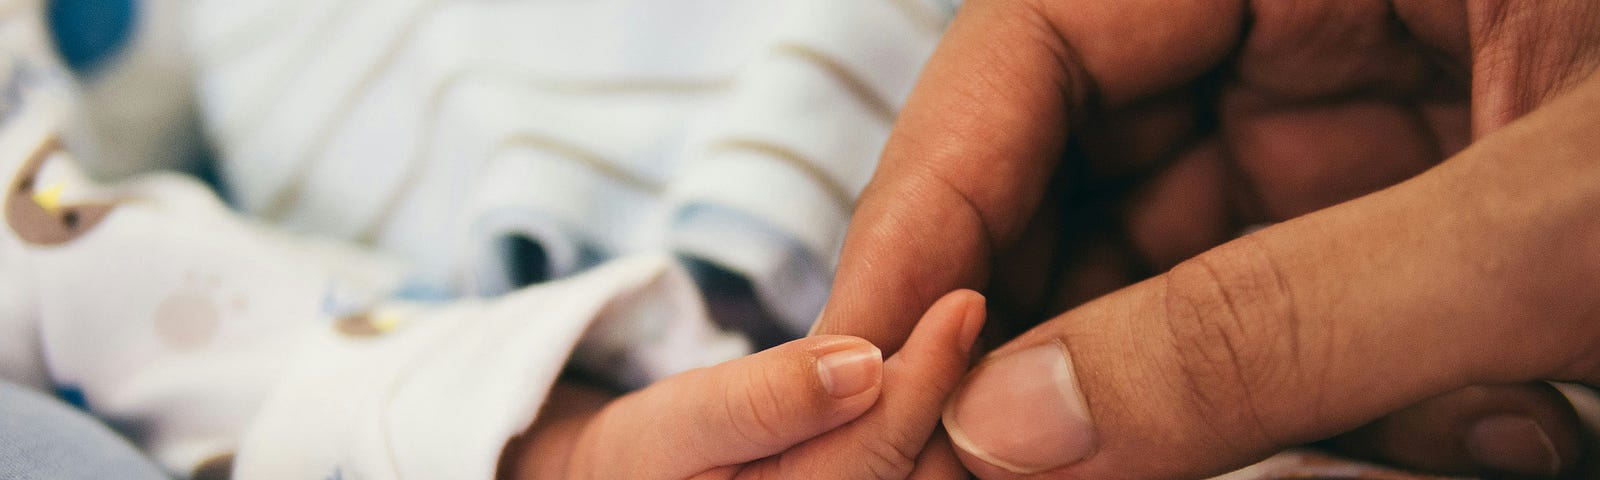 A mother touching her child’s hand.